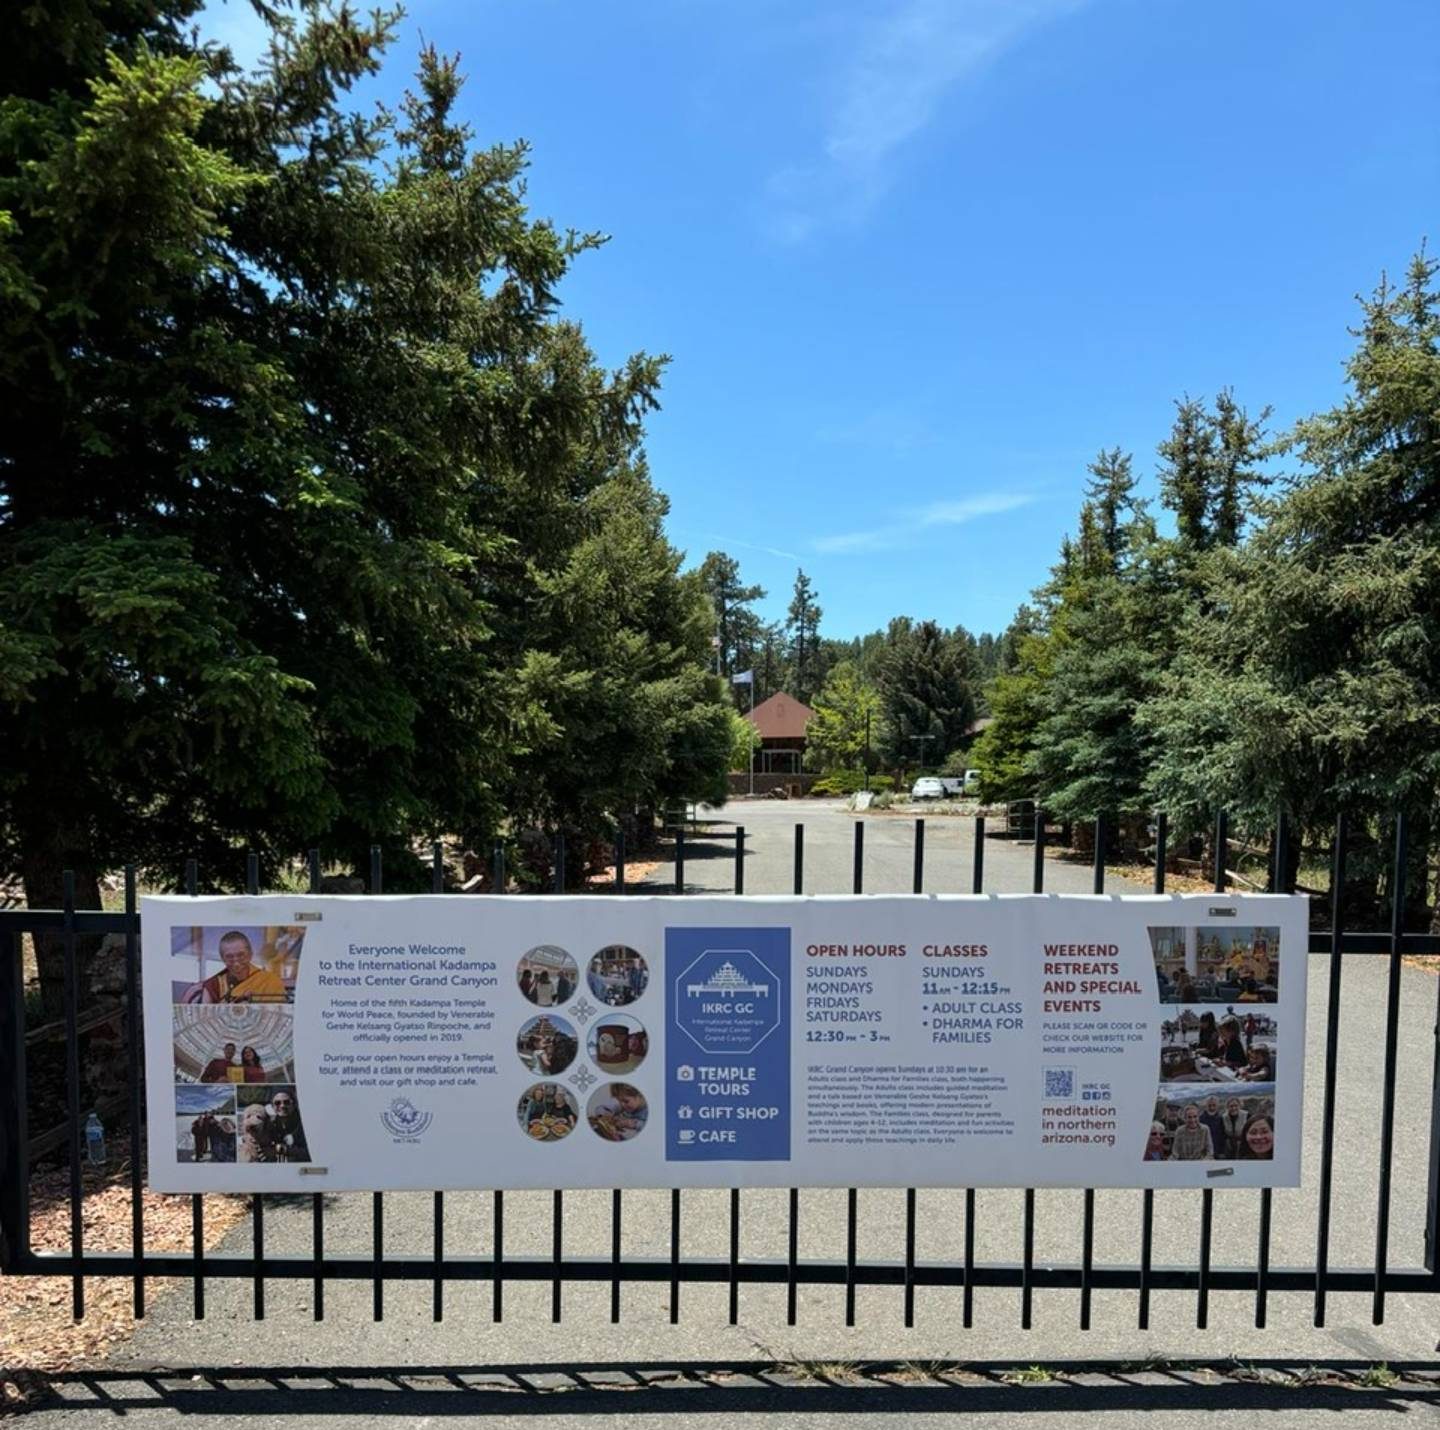 New temporary signage was added to the front gate to welcome visitors and provide them with helpful information 